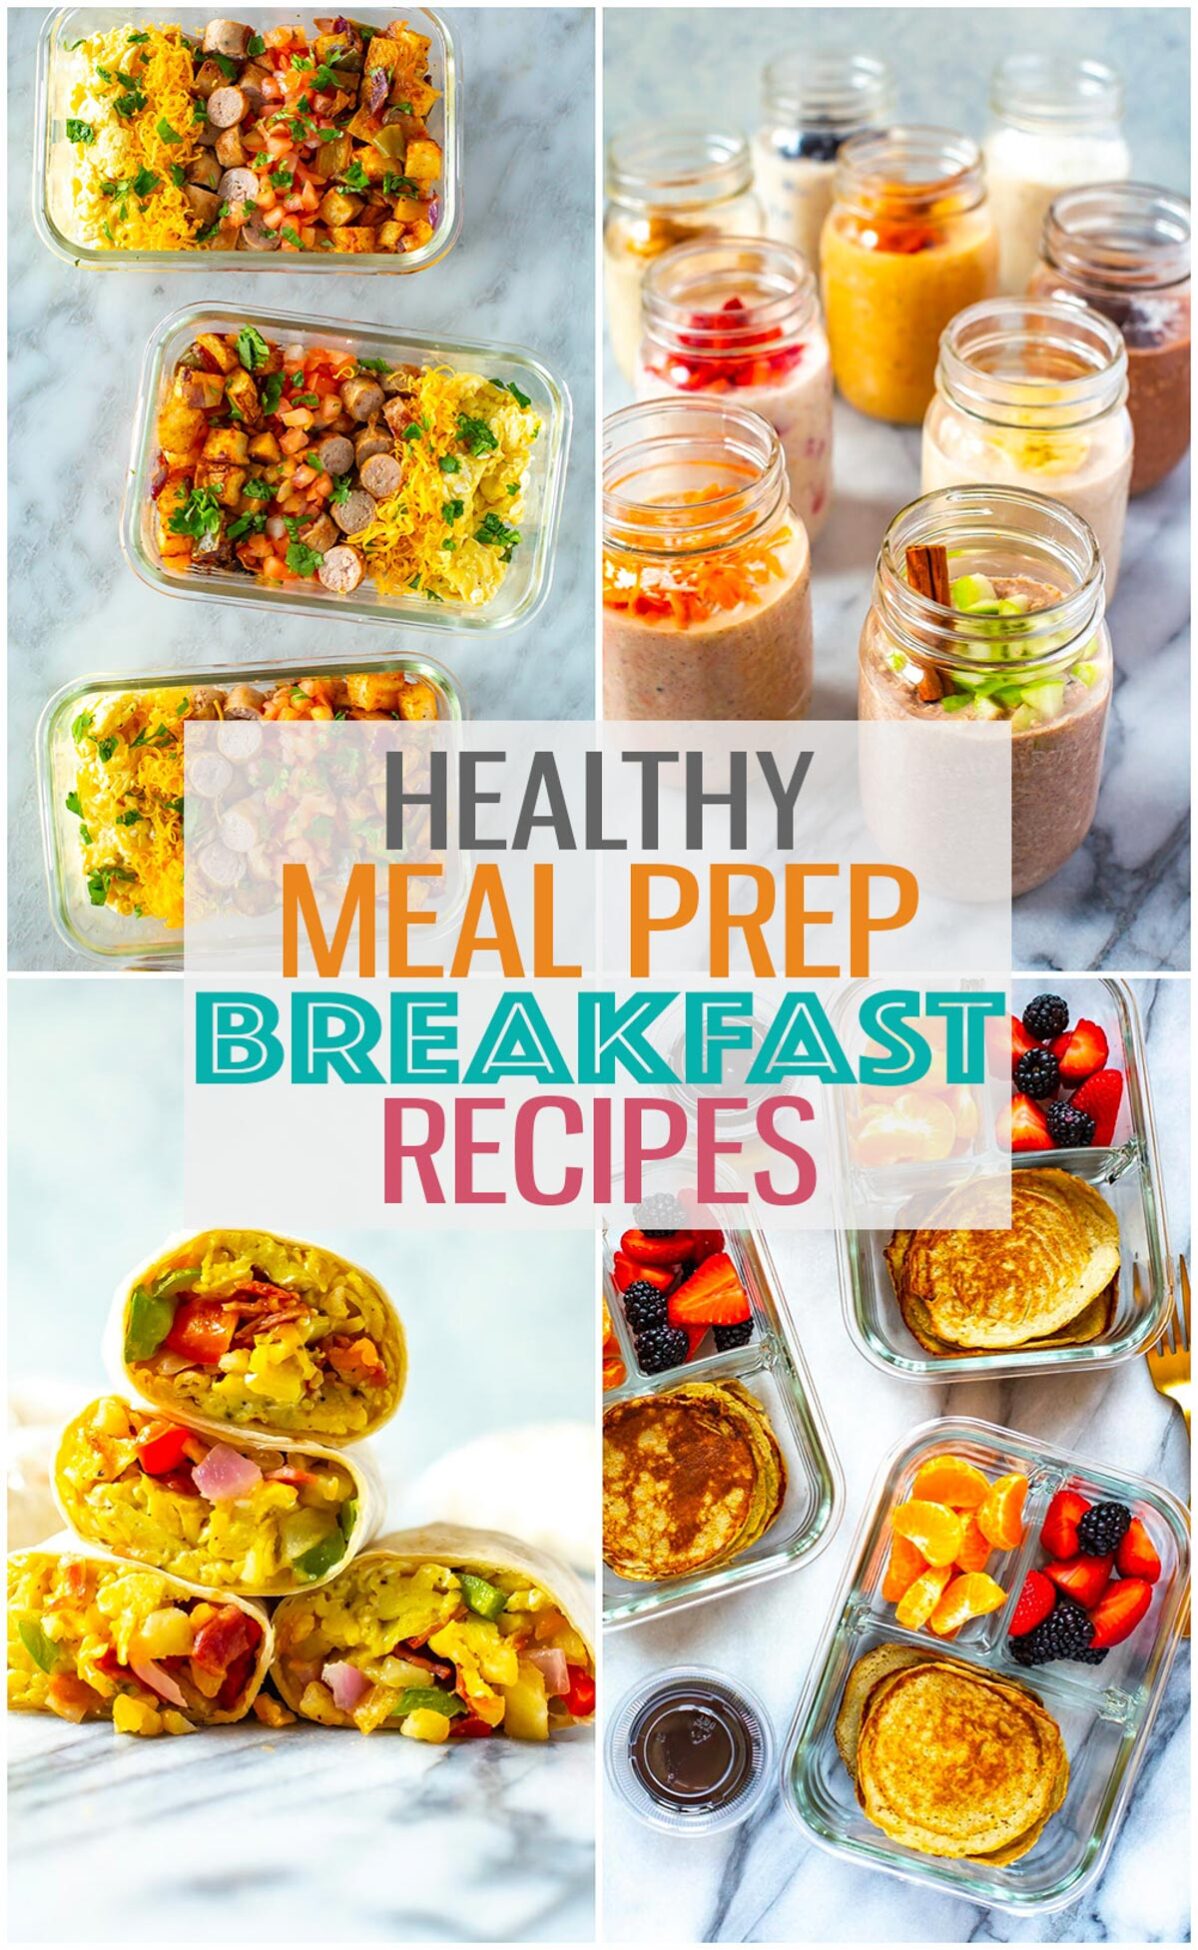 A collage of four different breakfast recipes with the text "Healthy Meal Prep Breakfast Recipes" layered over top.